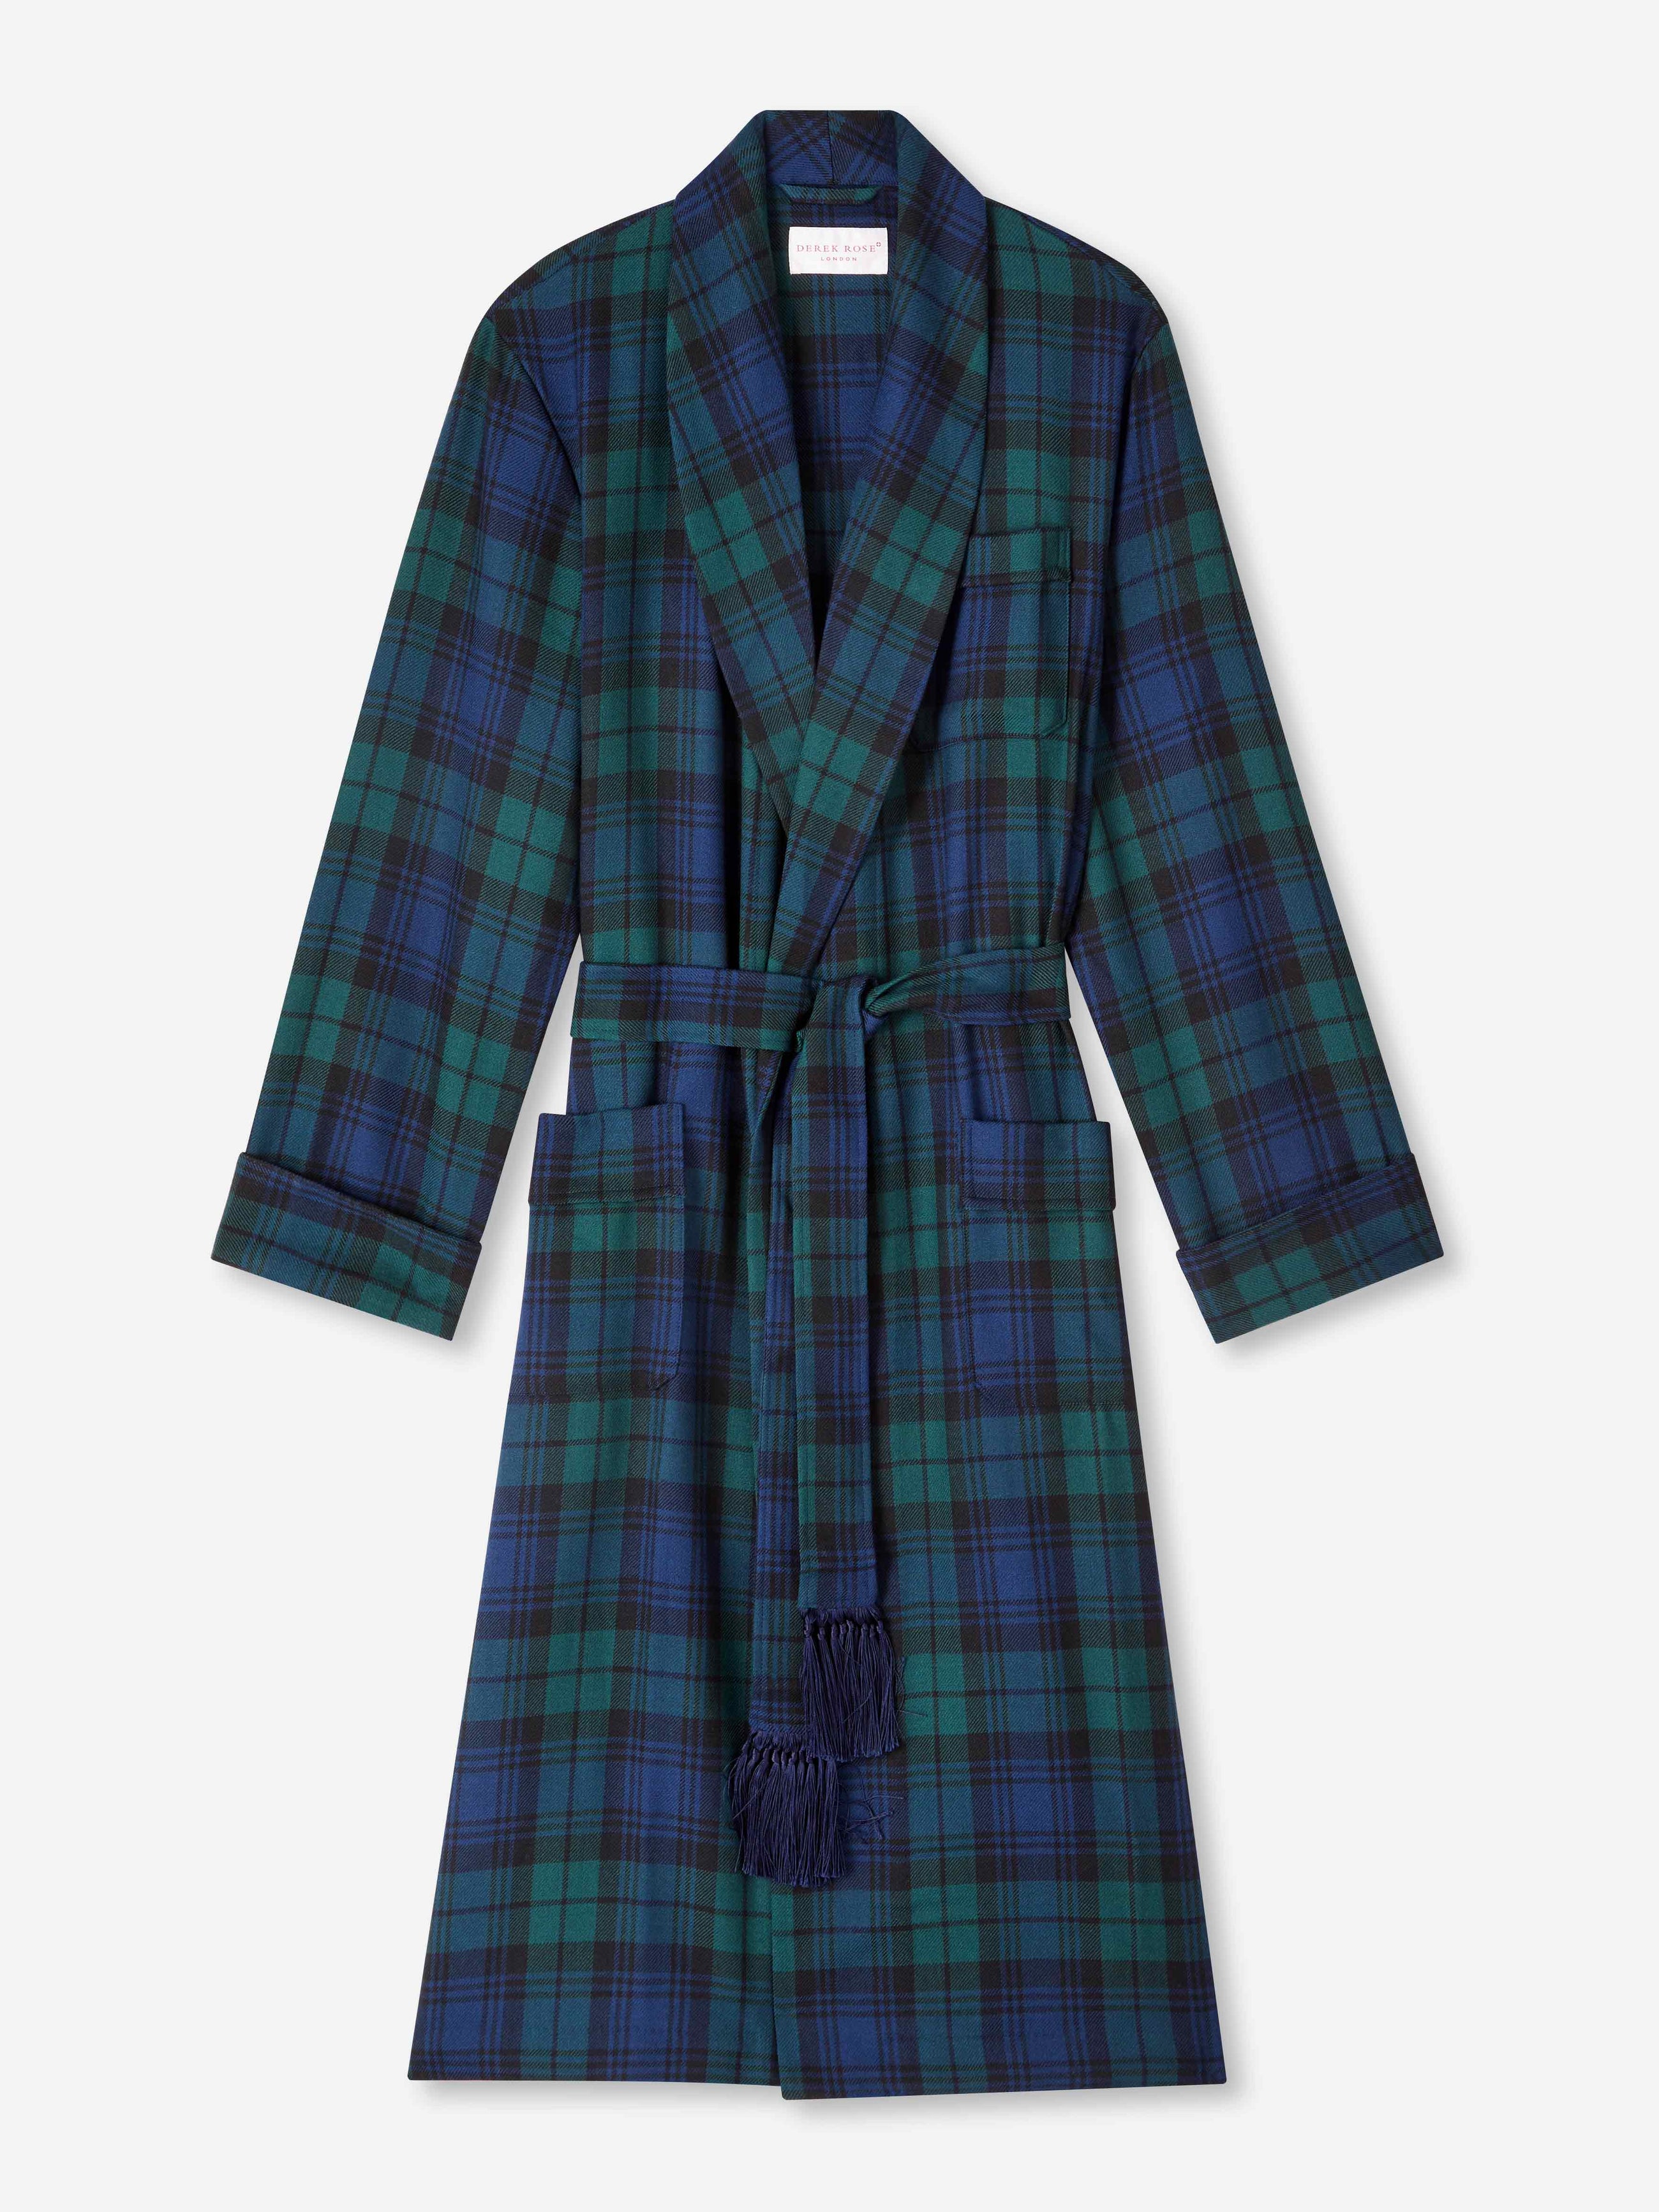 Boux Avenue sale: This dressing gown is currently 20% off